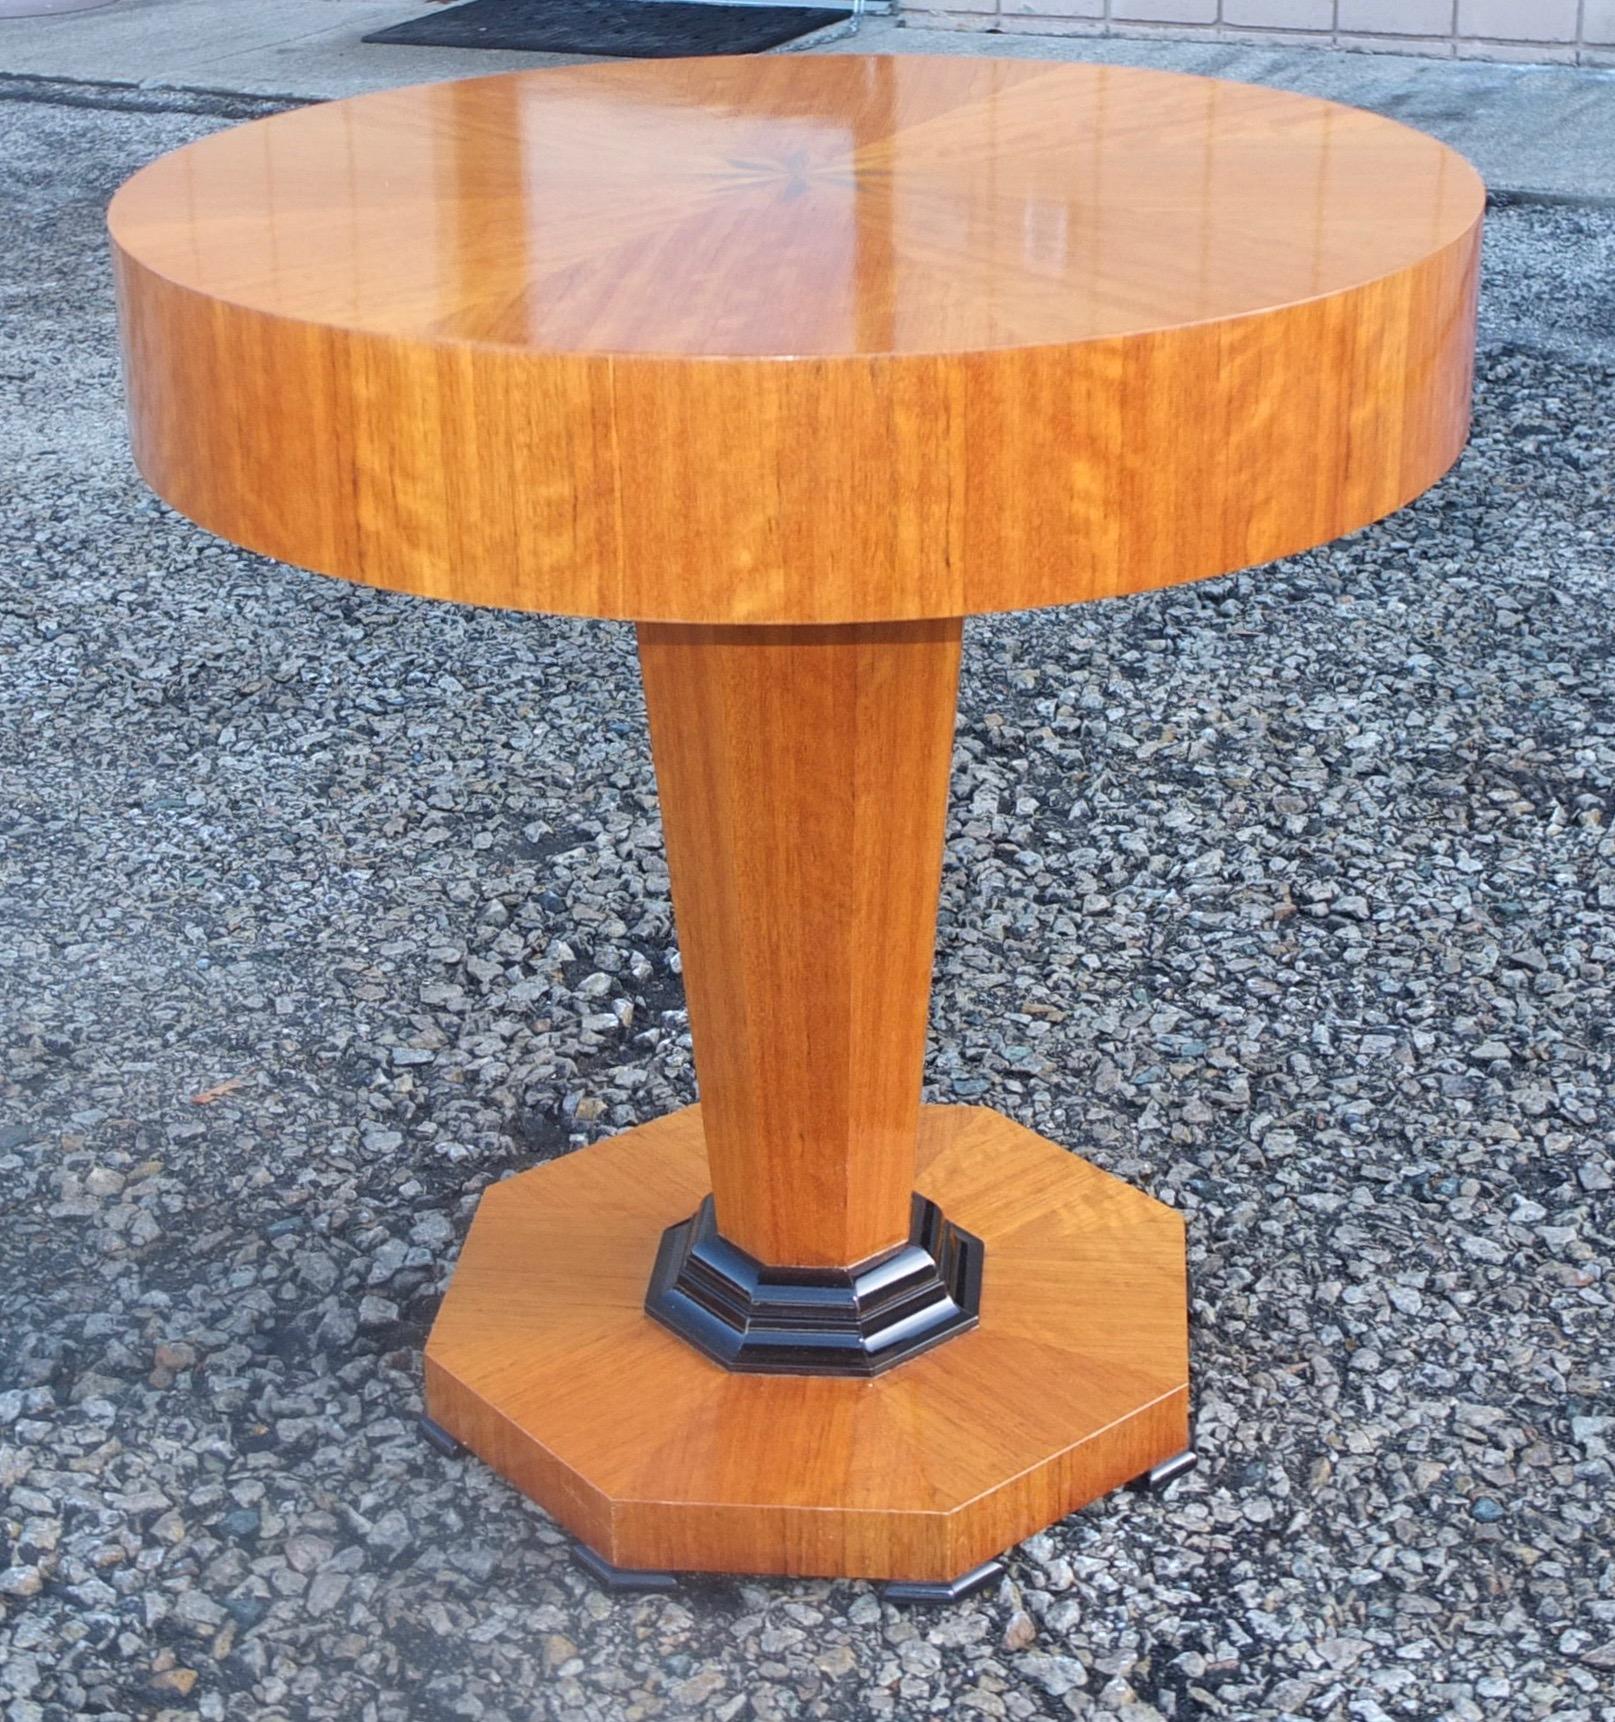 Studio Craft Tropical Olive Wood Pedestal Table by Gregg Lipton For Sale 5